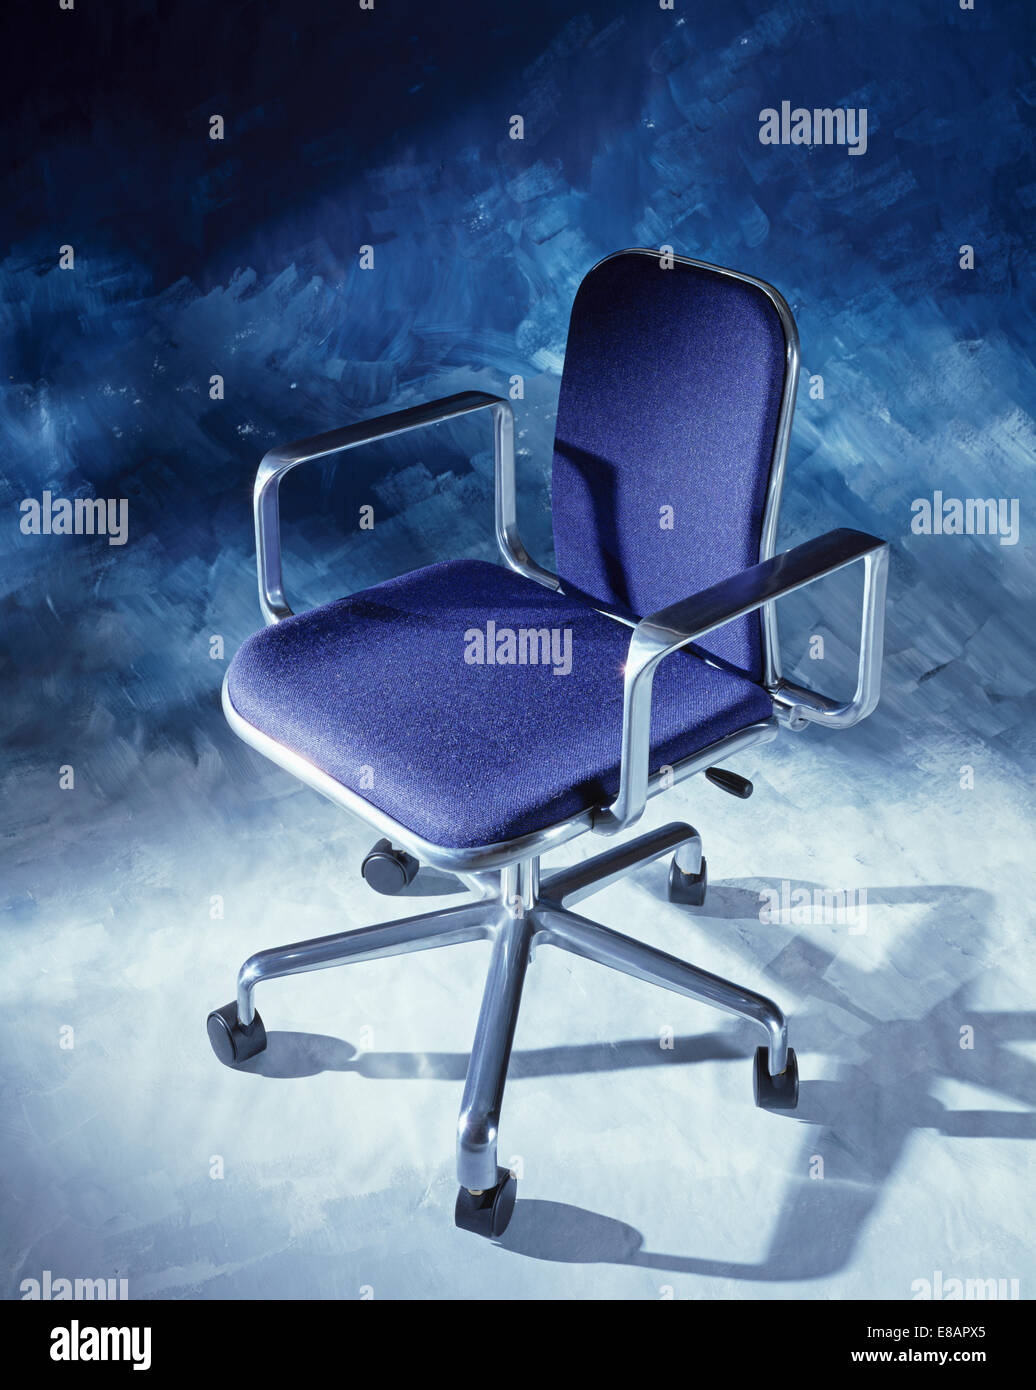 Stainless steel swivel office chair with dark blue upholstered seat *** Local Caption *** Close-up of stainless steel office cha Stock Photo